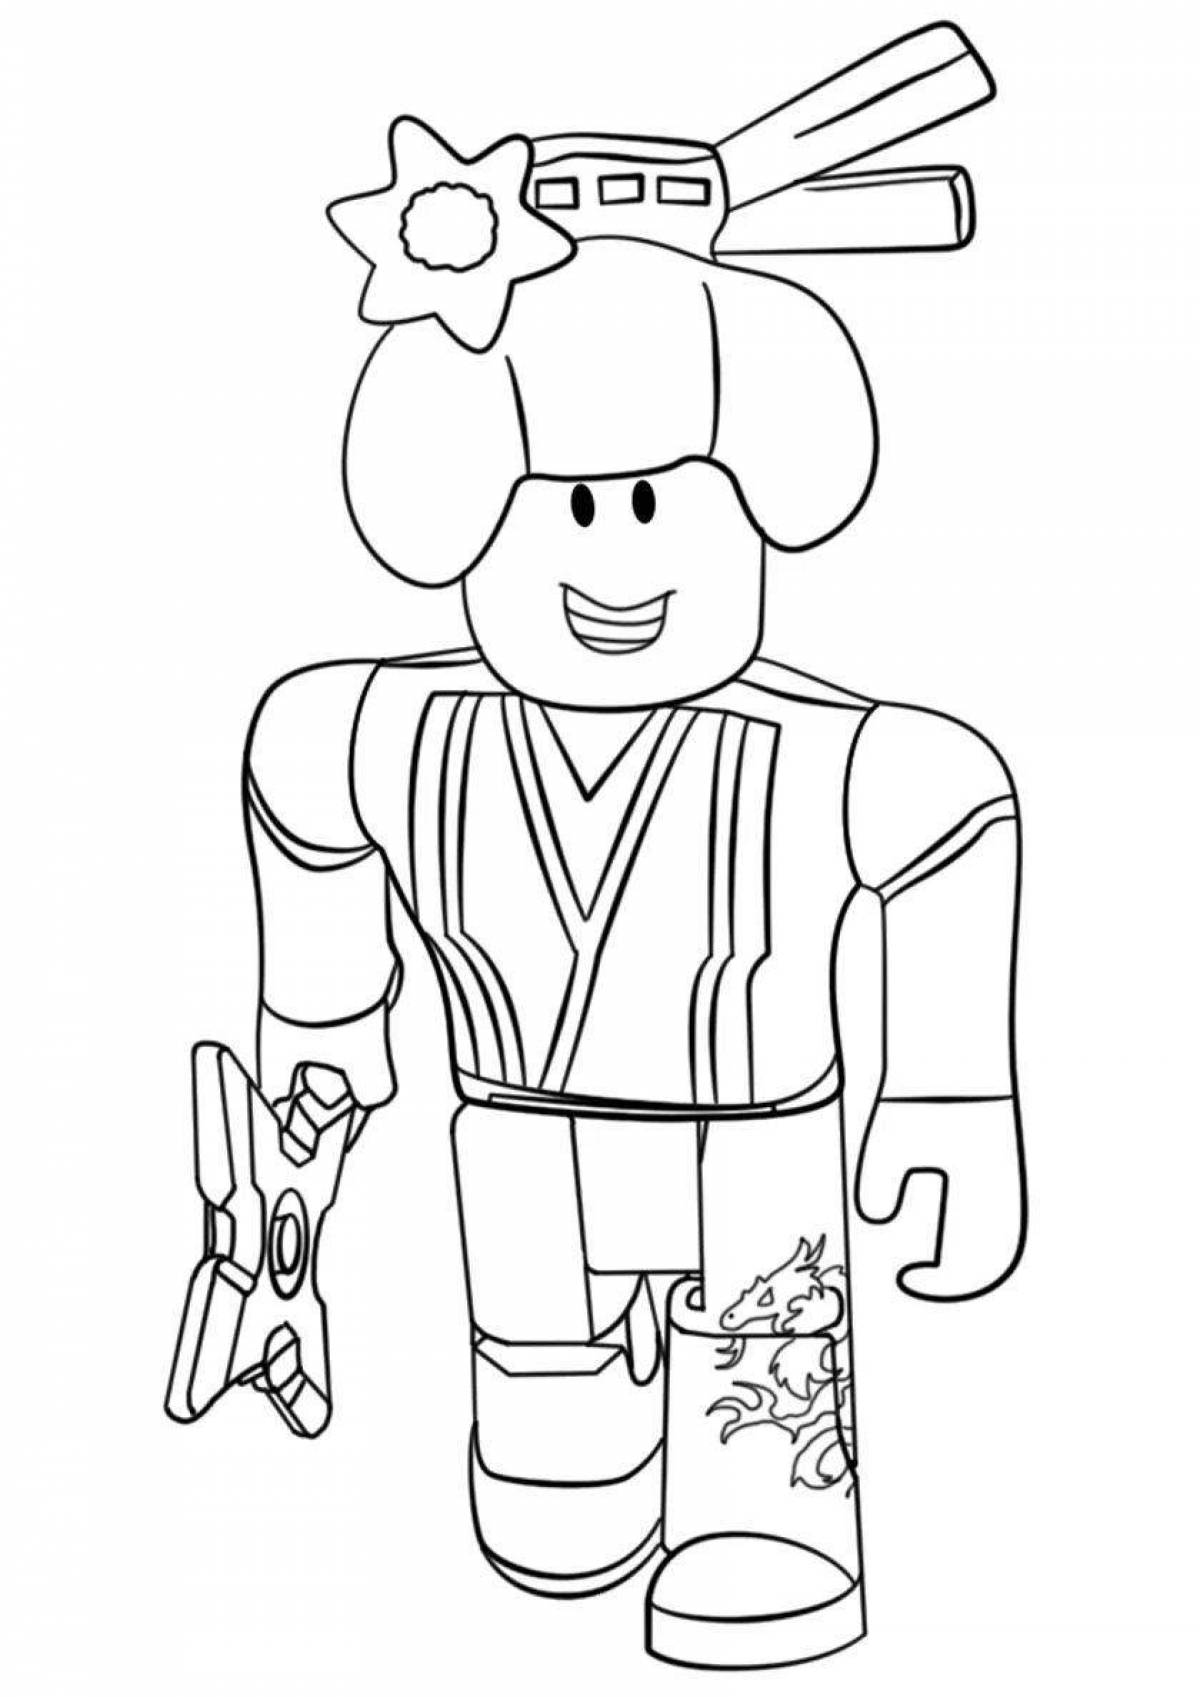 Colorful roblox body coloring page